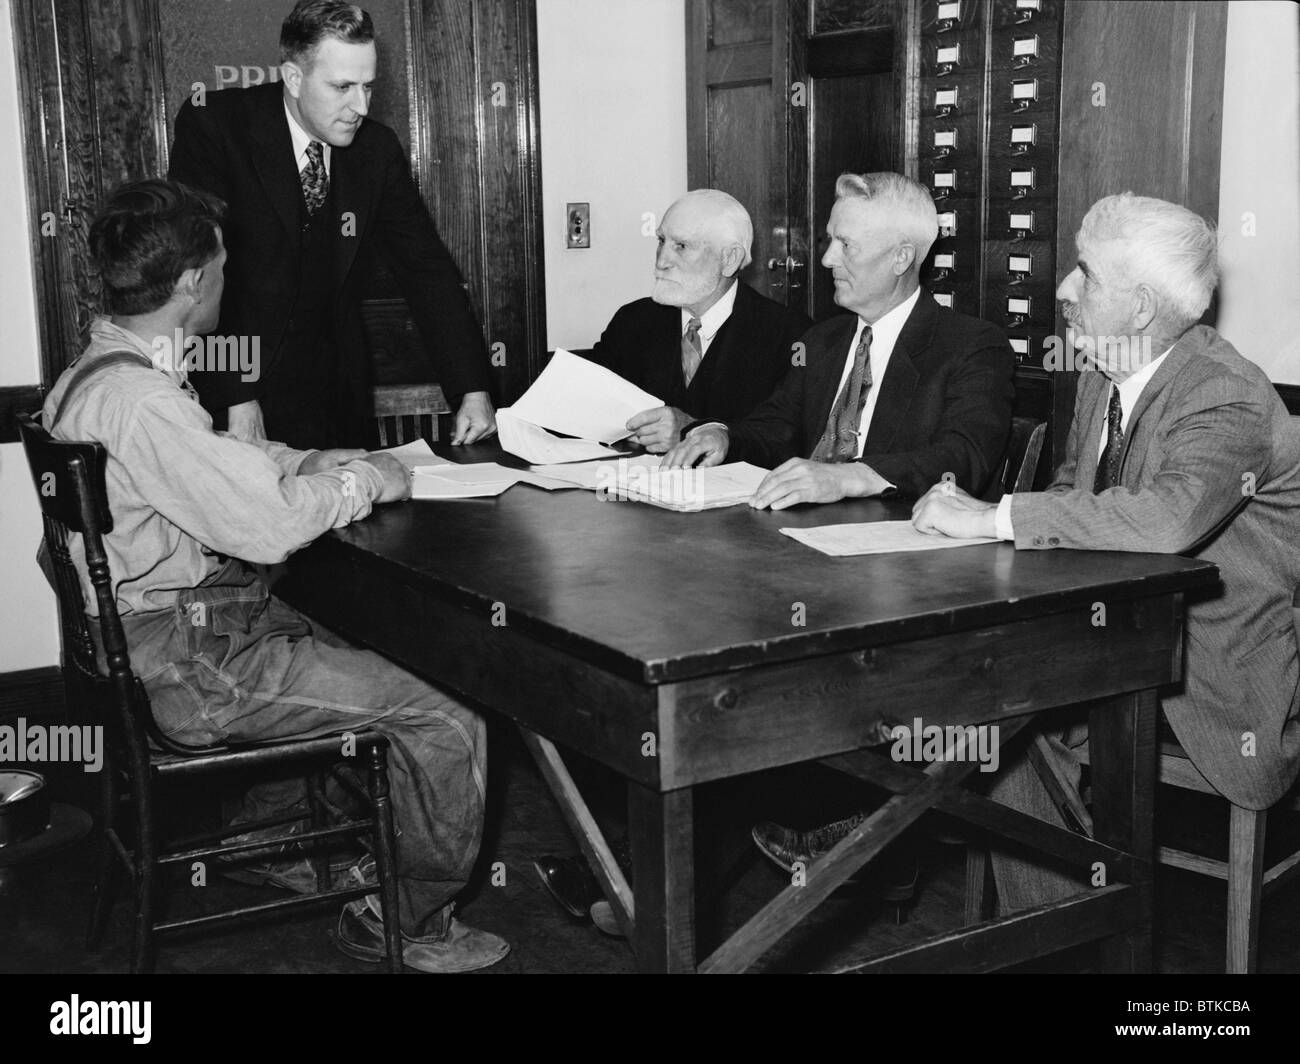 A Nebraska farmer meets with a Farm Security Administration Debt Adjustment Committee for help to avoiding foreclosure of his farm mortgage. The committee would negotiate with the bank to adjust his mortgage terms, allowing the farmer to remain in business. May 1936 photo by Arthur Rothstein. Stock Photo